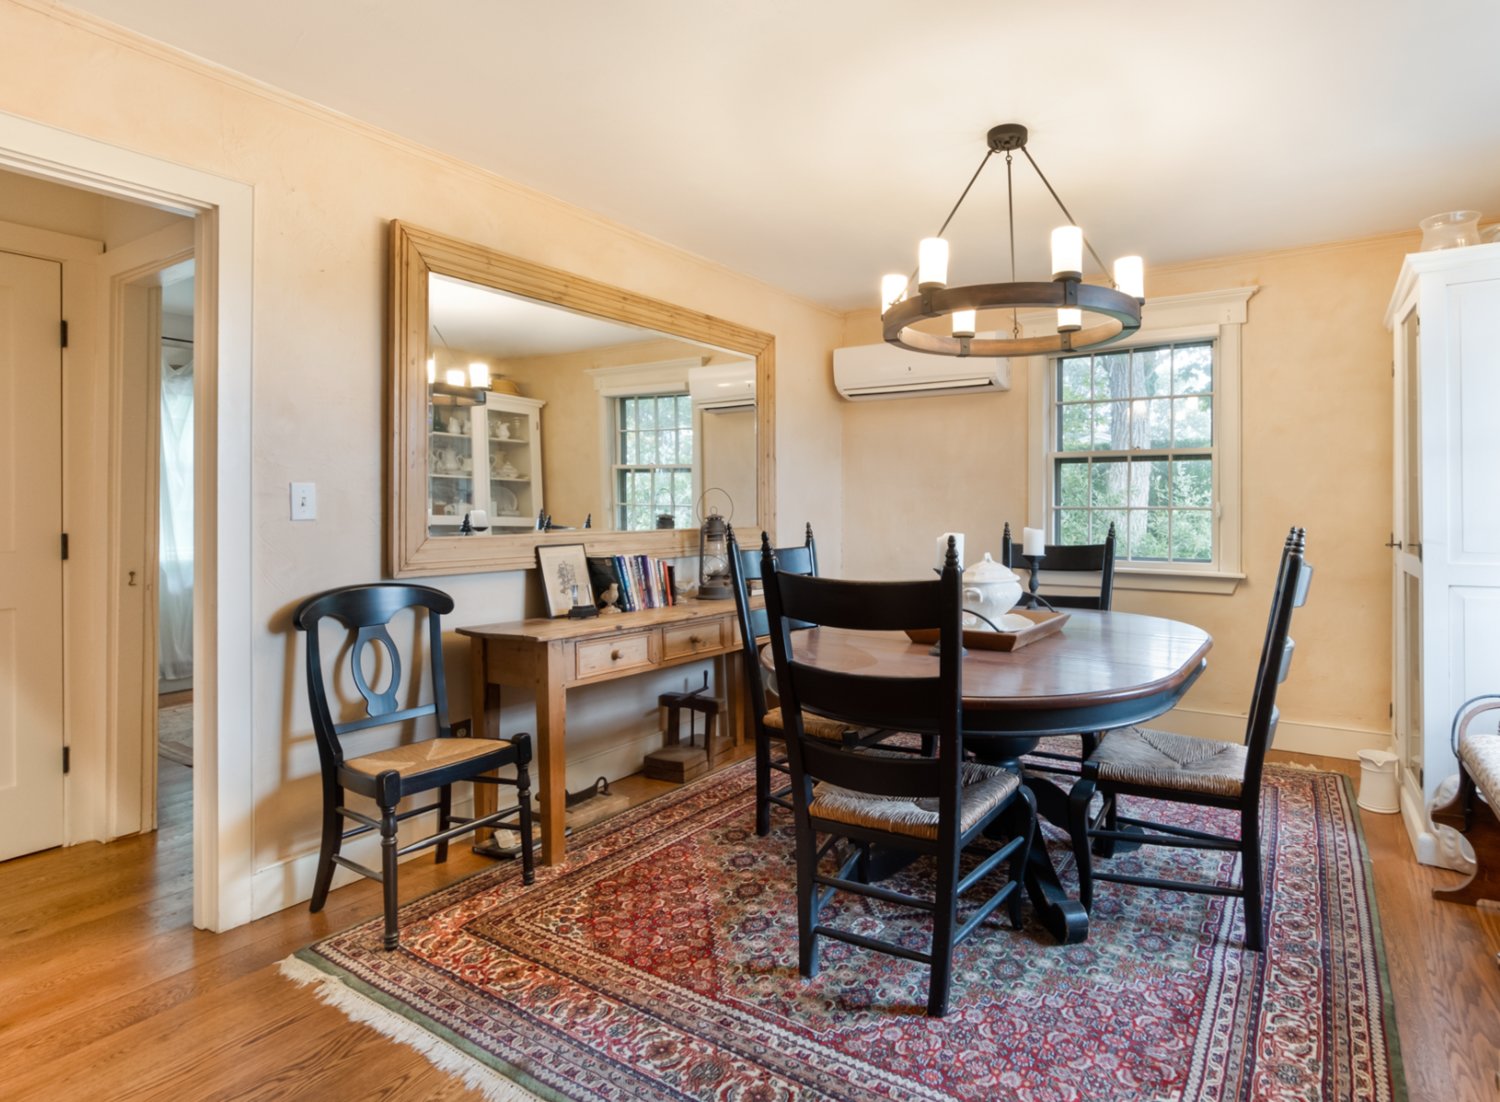 The dining room has wood floors and windows that let in an abundance of natural light.